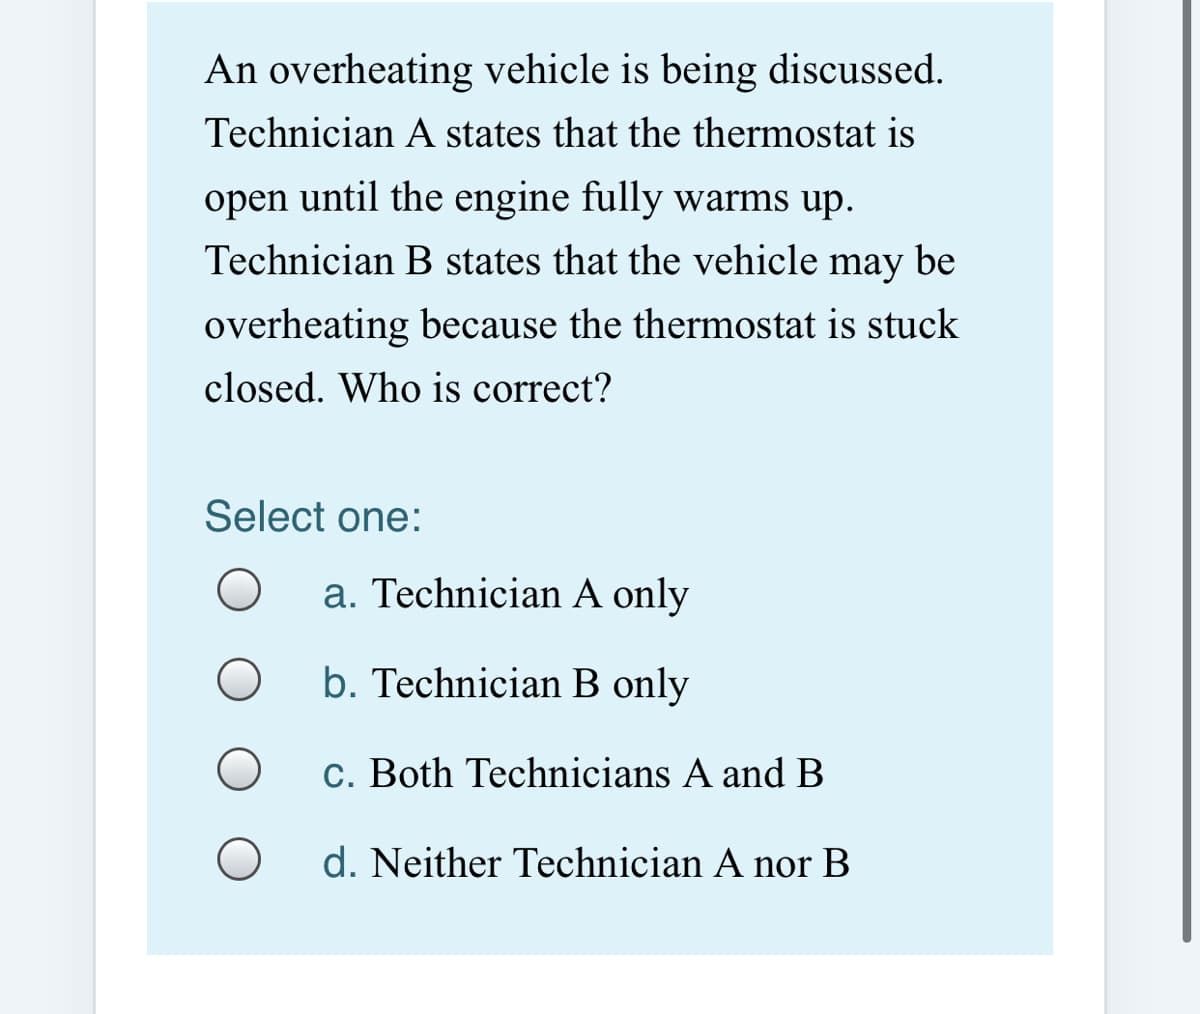 An overheating vehicle is being discussed.
Technician A states that the thermostat is
open until the engine fully warms up.
Technician B states that the vehicle may be
overheating because the thermostat is stuck
closed. Who is correct?
Select one:
a. Technician A only
b. Technician B only
c. Both Technicians A and B
d. Neither Technician A nor B
